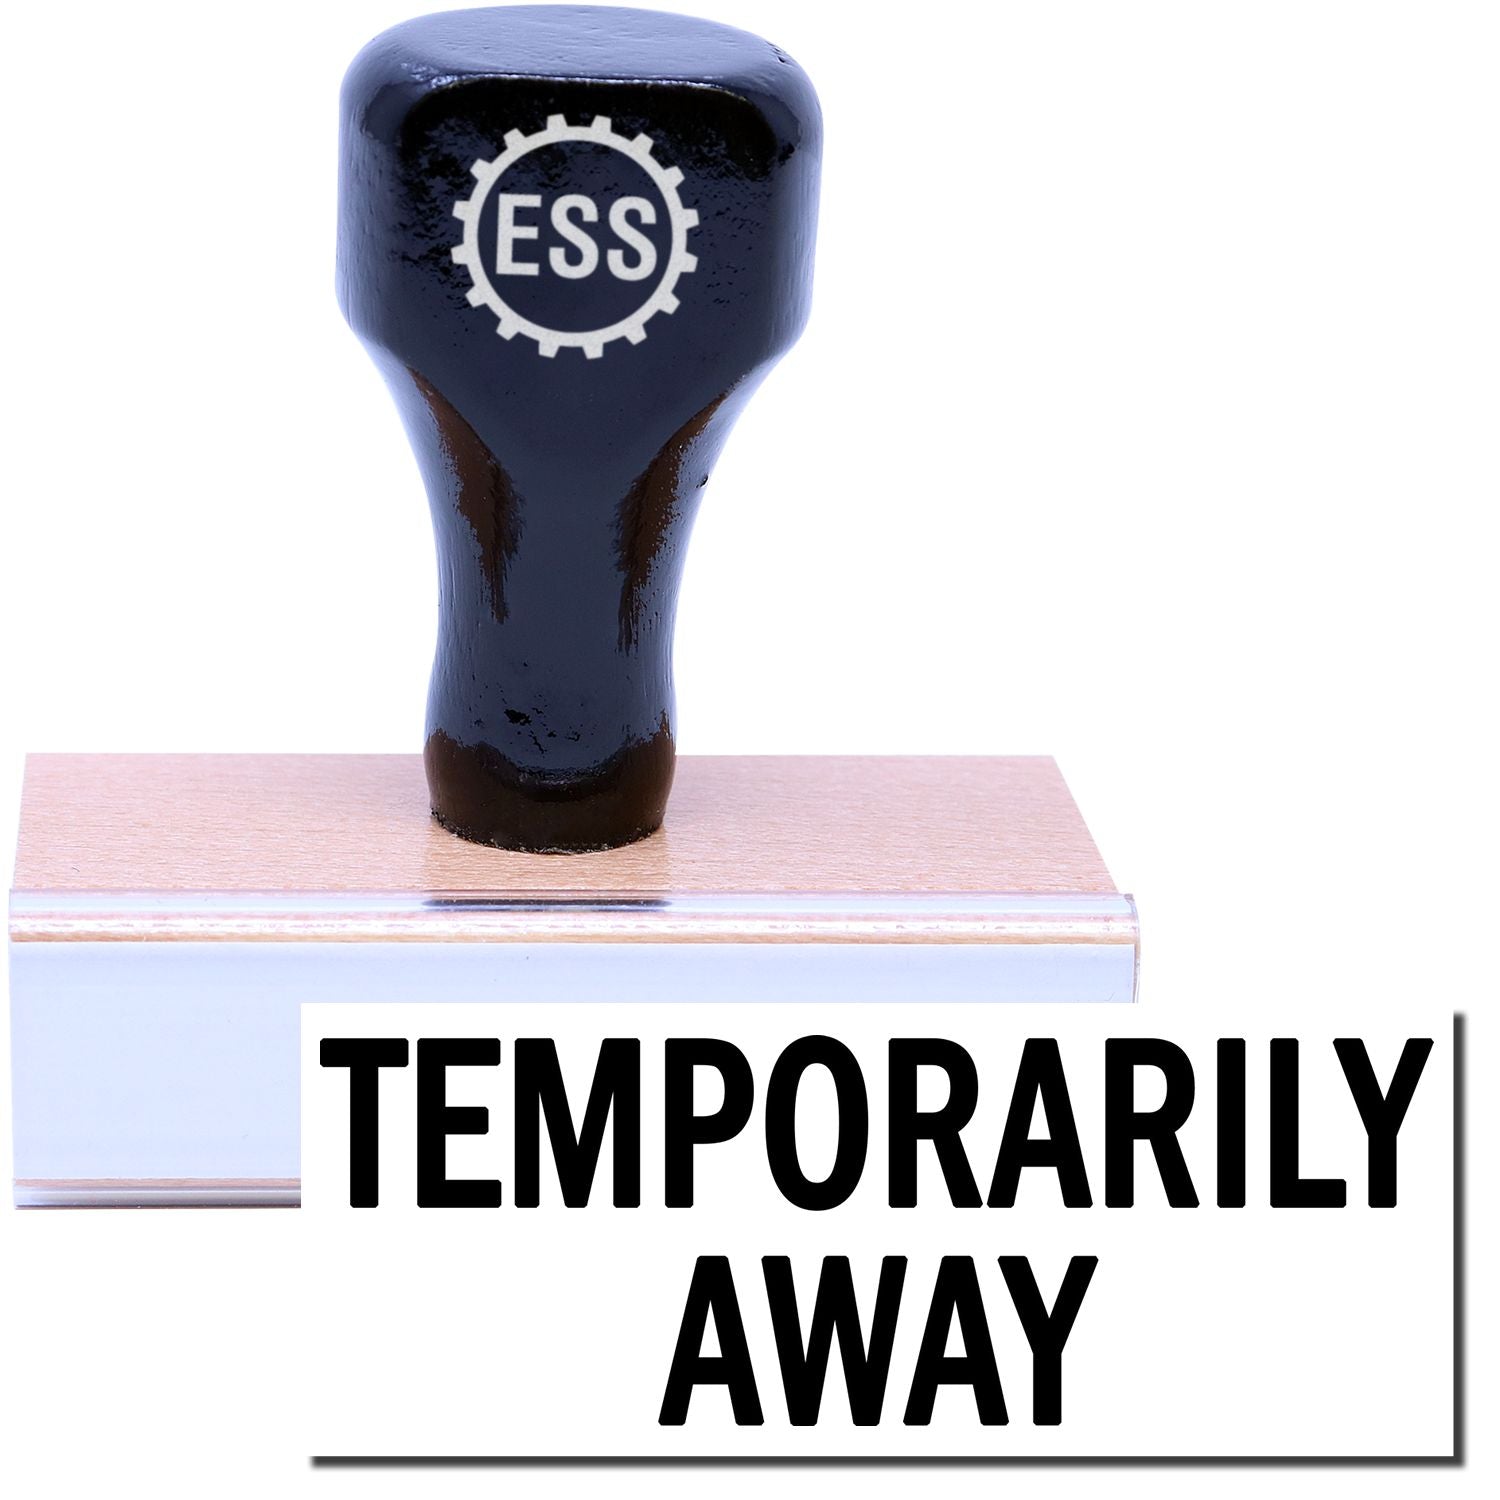 A stock office rubber stamp with a stamped image showing how the text "TEMPORARILY AWAY" in a large font is displayed after stamping.